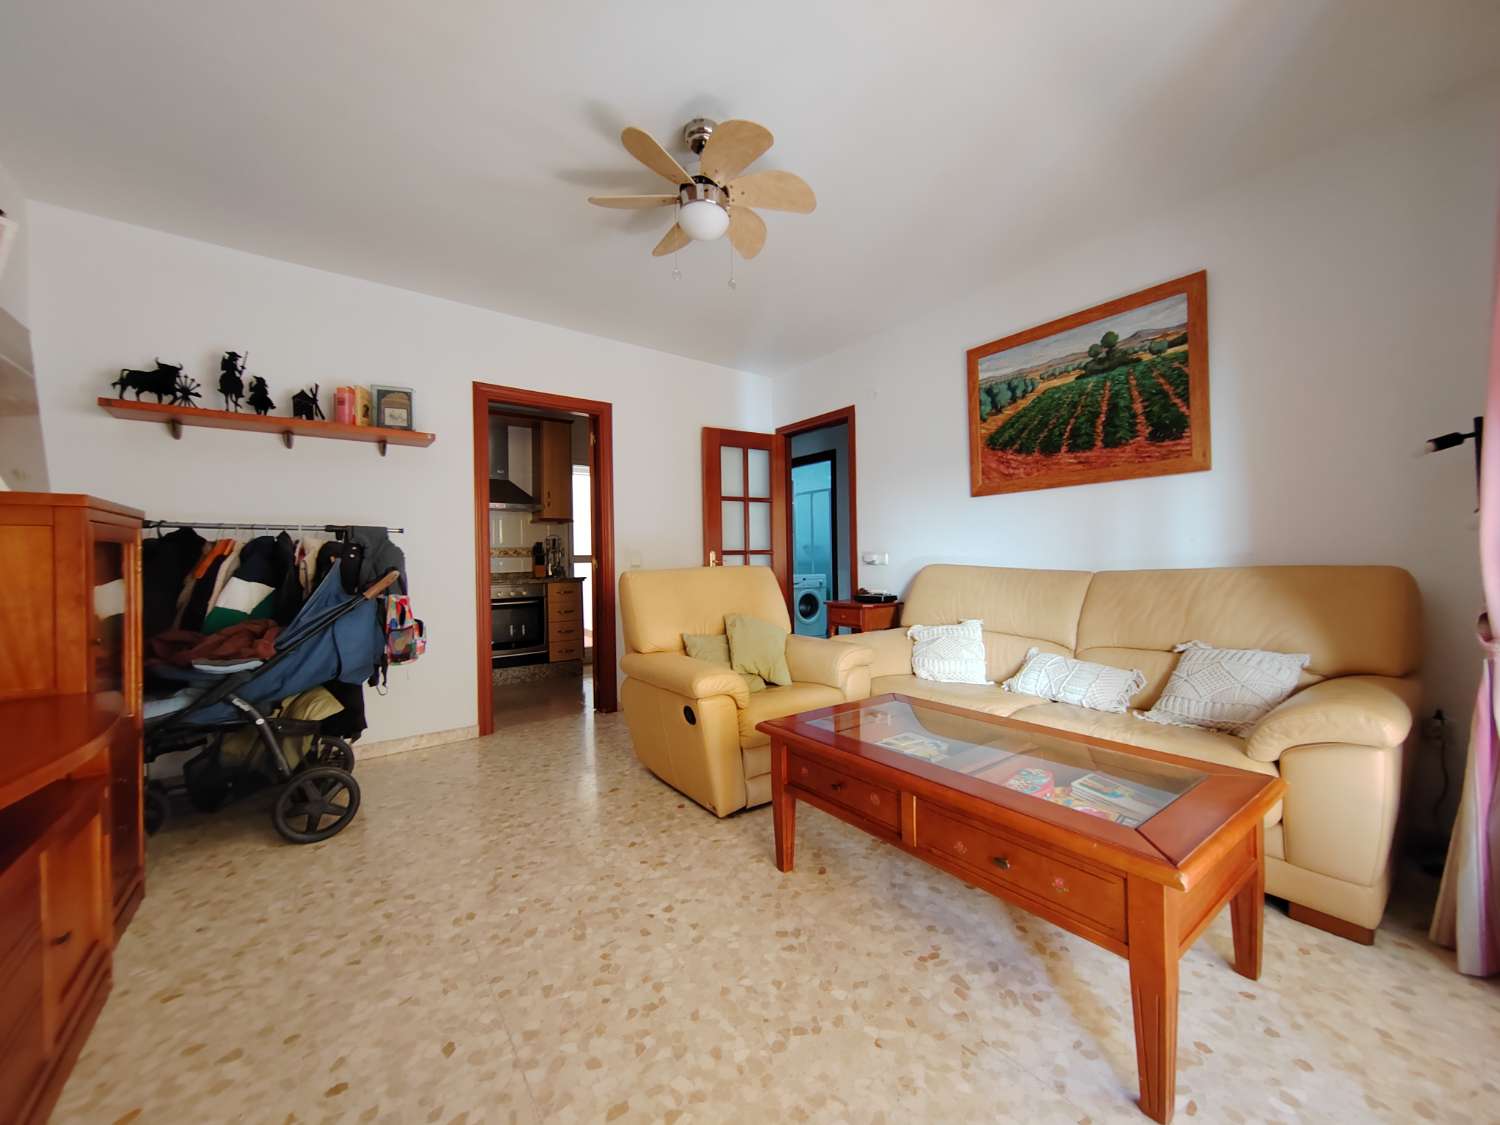 Bright 1-bedroom apartment with garage in Calle San Andrés, steps from the beach